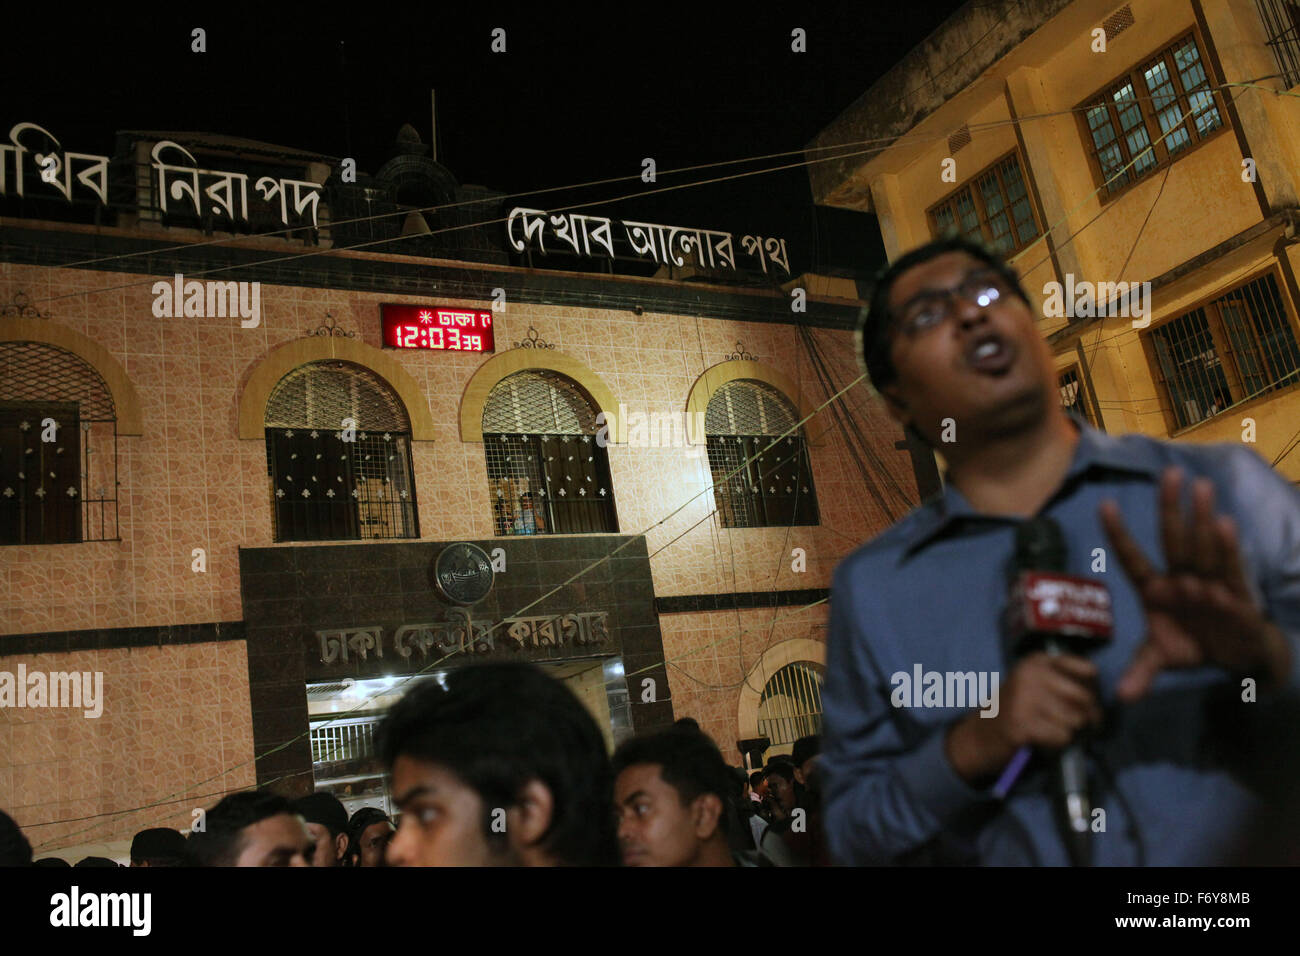 Dhaka, Bangladesh. 22nd November: Media busy to covering war criminals Salauddin Quader Chowdhury and Ali Ahsan Muhammad Mojaheed's death execution in front of Dhaka Central Gate in Dhaka on November 22, 2015. Two war criminals, BNP leader Salauddin Quader Chowdhury and Jamaat-e-Islami secretary general Ali Ahsan Mohammad Mojaheed, have been executed at the same time for their crimes committed against humanity in 1971, says jail official. They were executed by hanging at 12:55am Sunday at Dhaka Central Jail, said Inspector General of Prison Syed Iftekhar Uddin. Both of them were handed down de Stock Photo